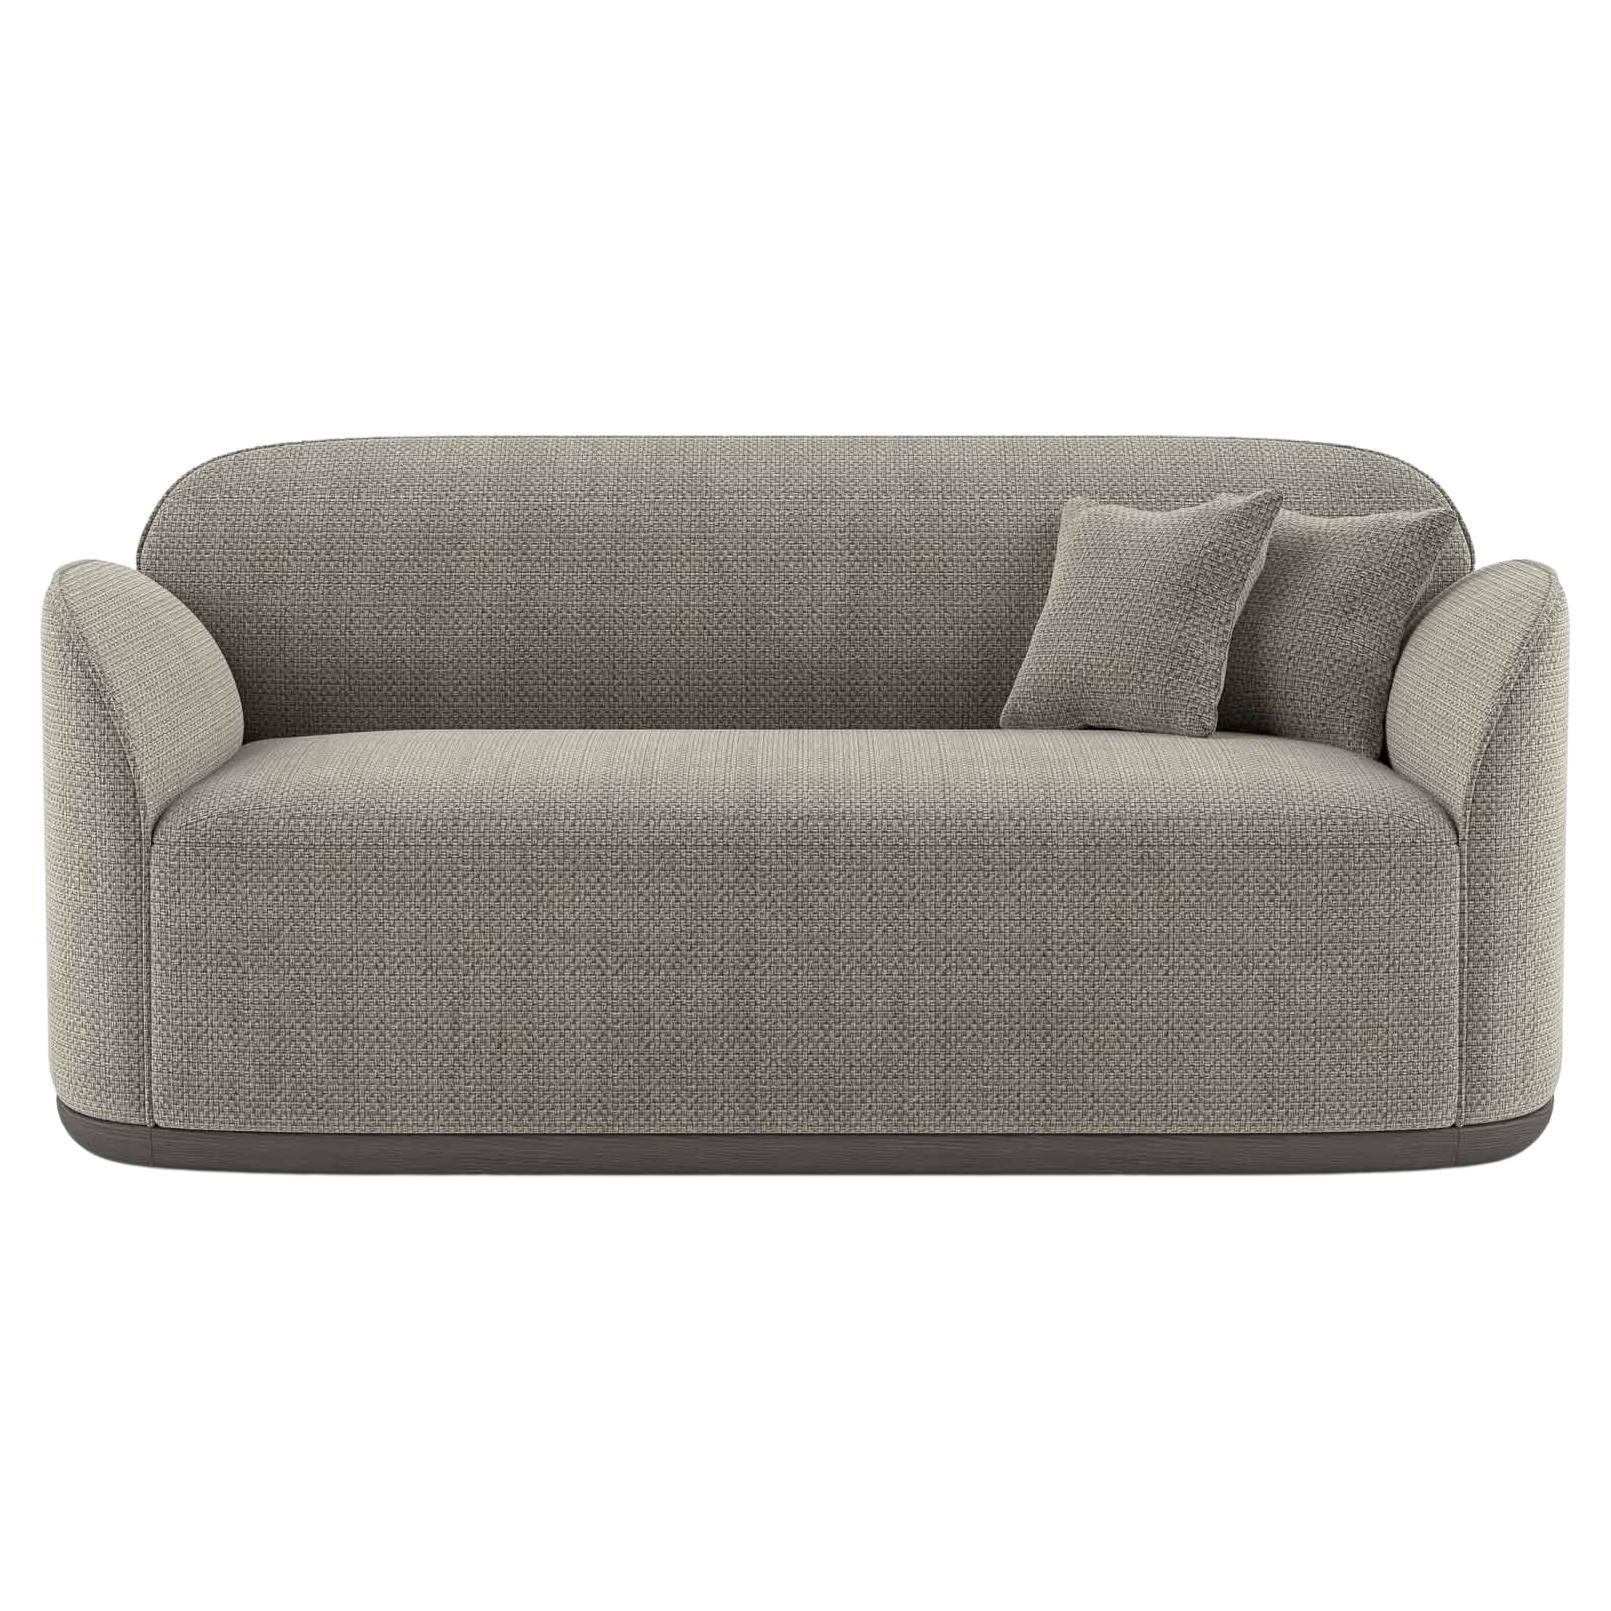 Unio Loveseat Upholstered with the Pierre Frey Hanoi Fabric by Poiat